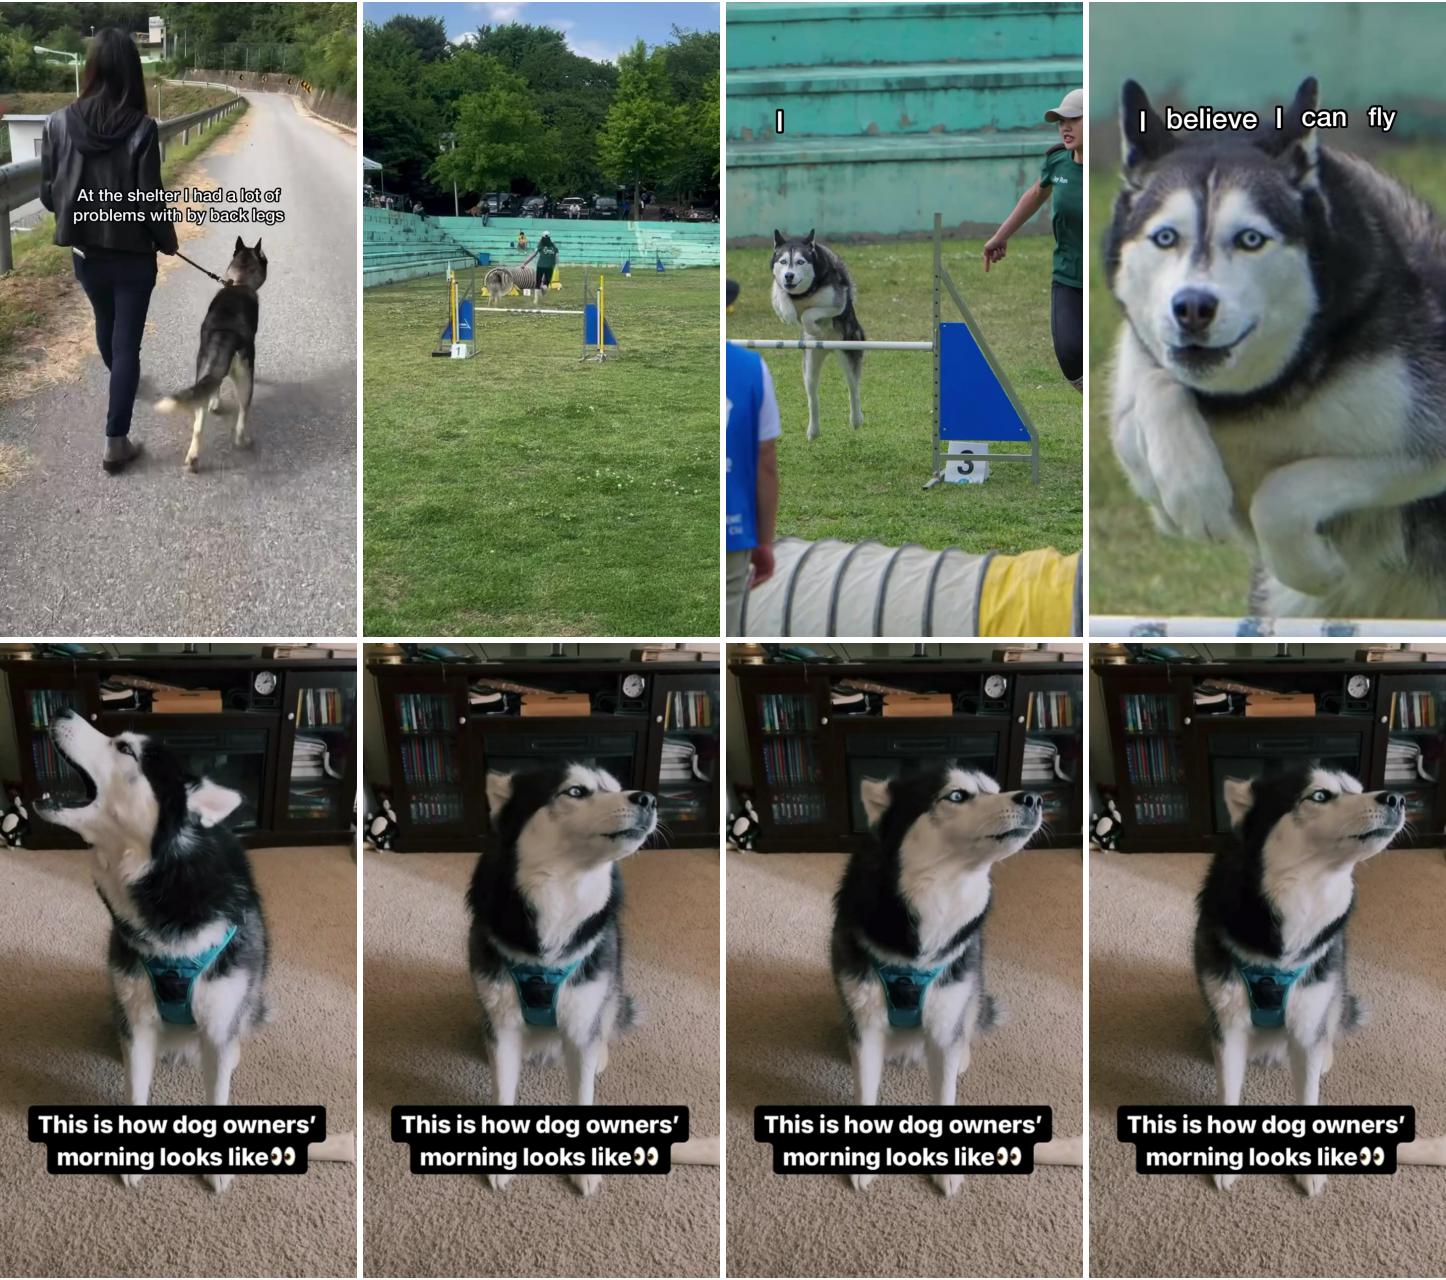 When you believe, anything is possible #dogagility #husky #dog #doglovers; good morning